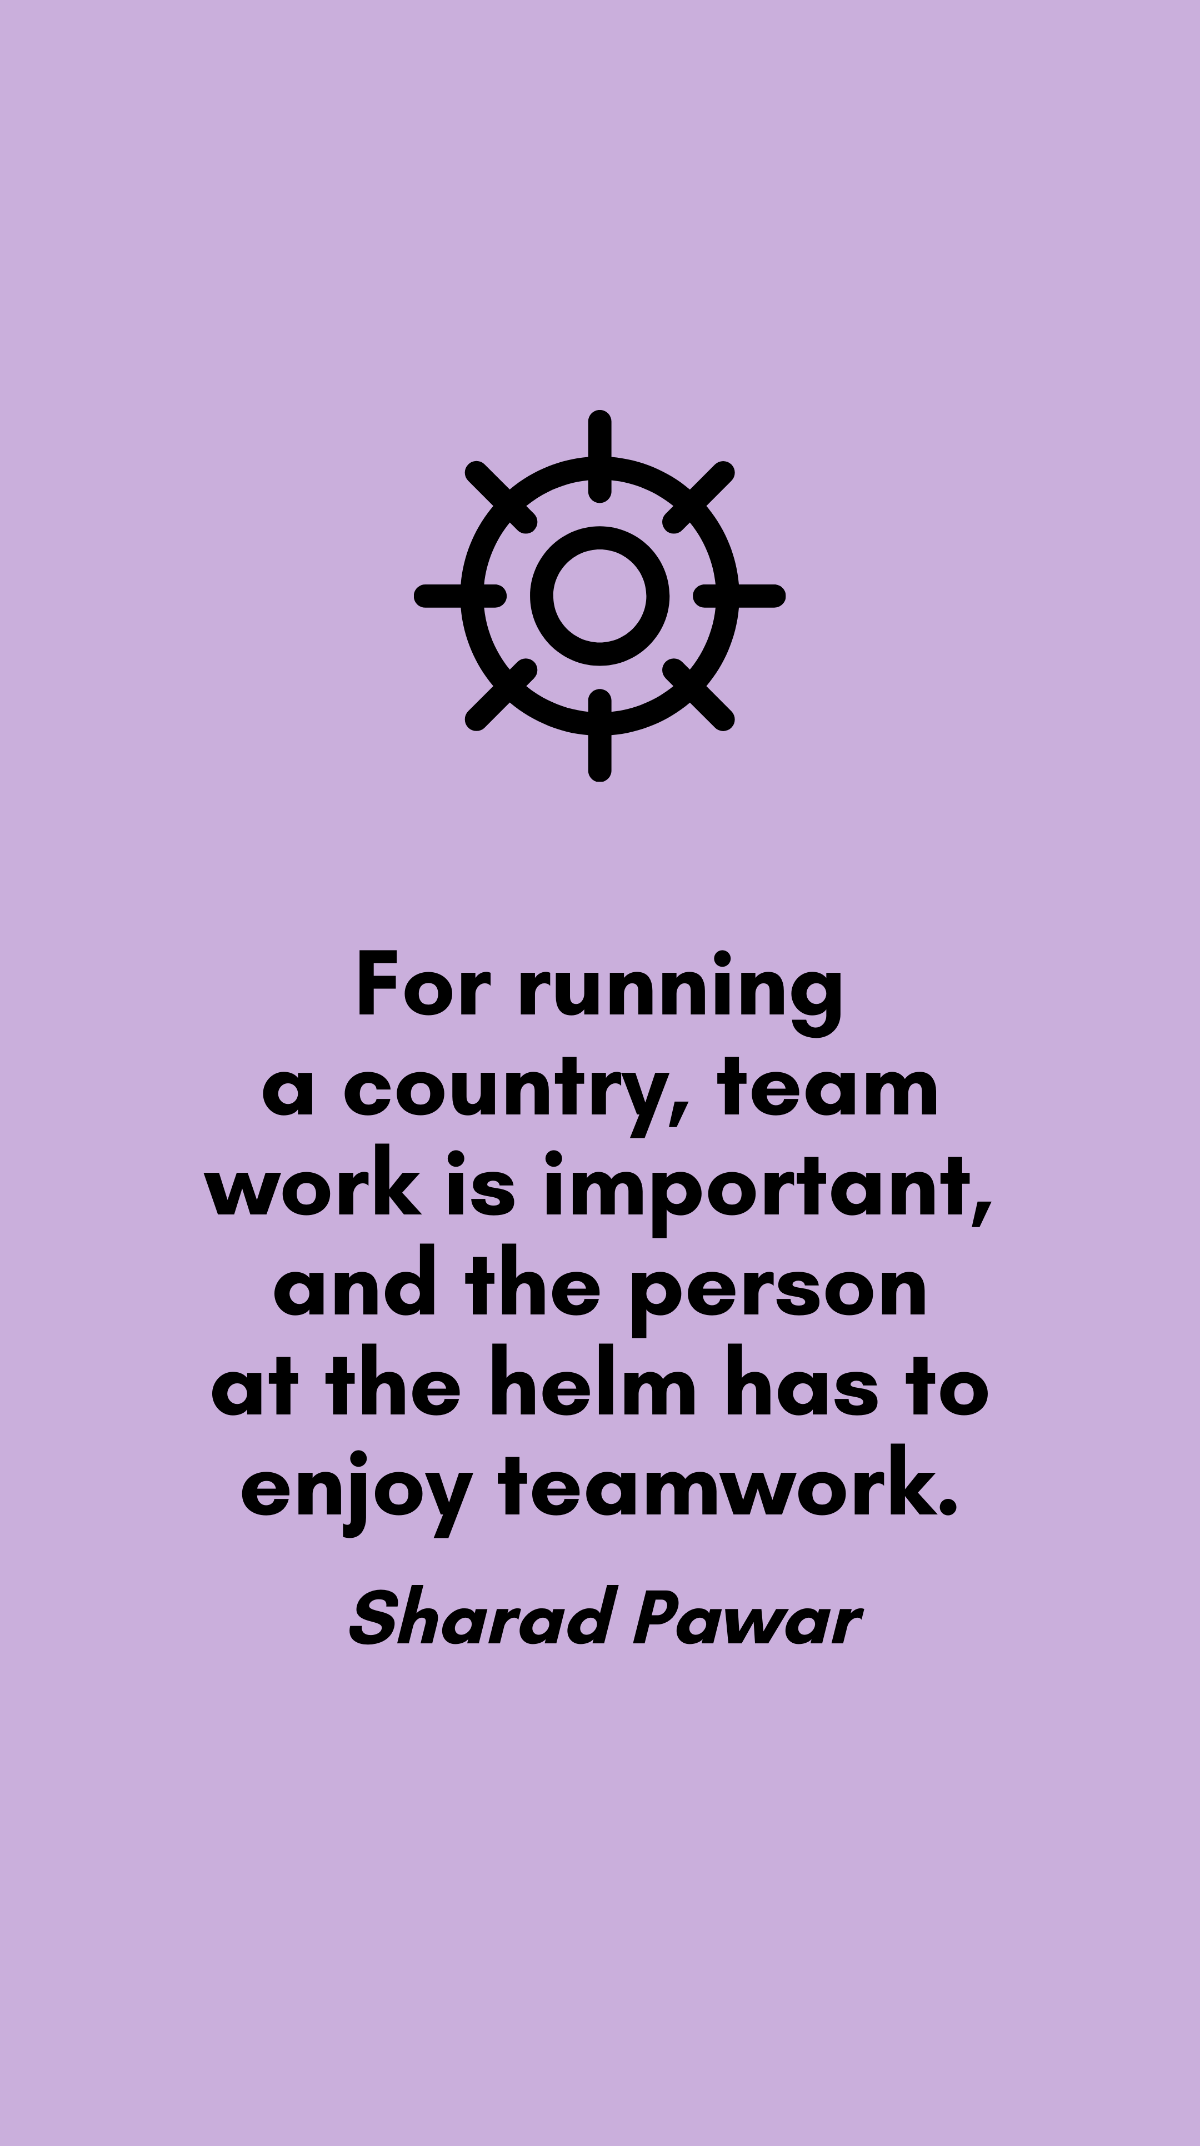 Sharad Pawar - For running a country, team work is important, and the person at the helm has to enjoy teamwork. Template